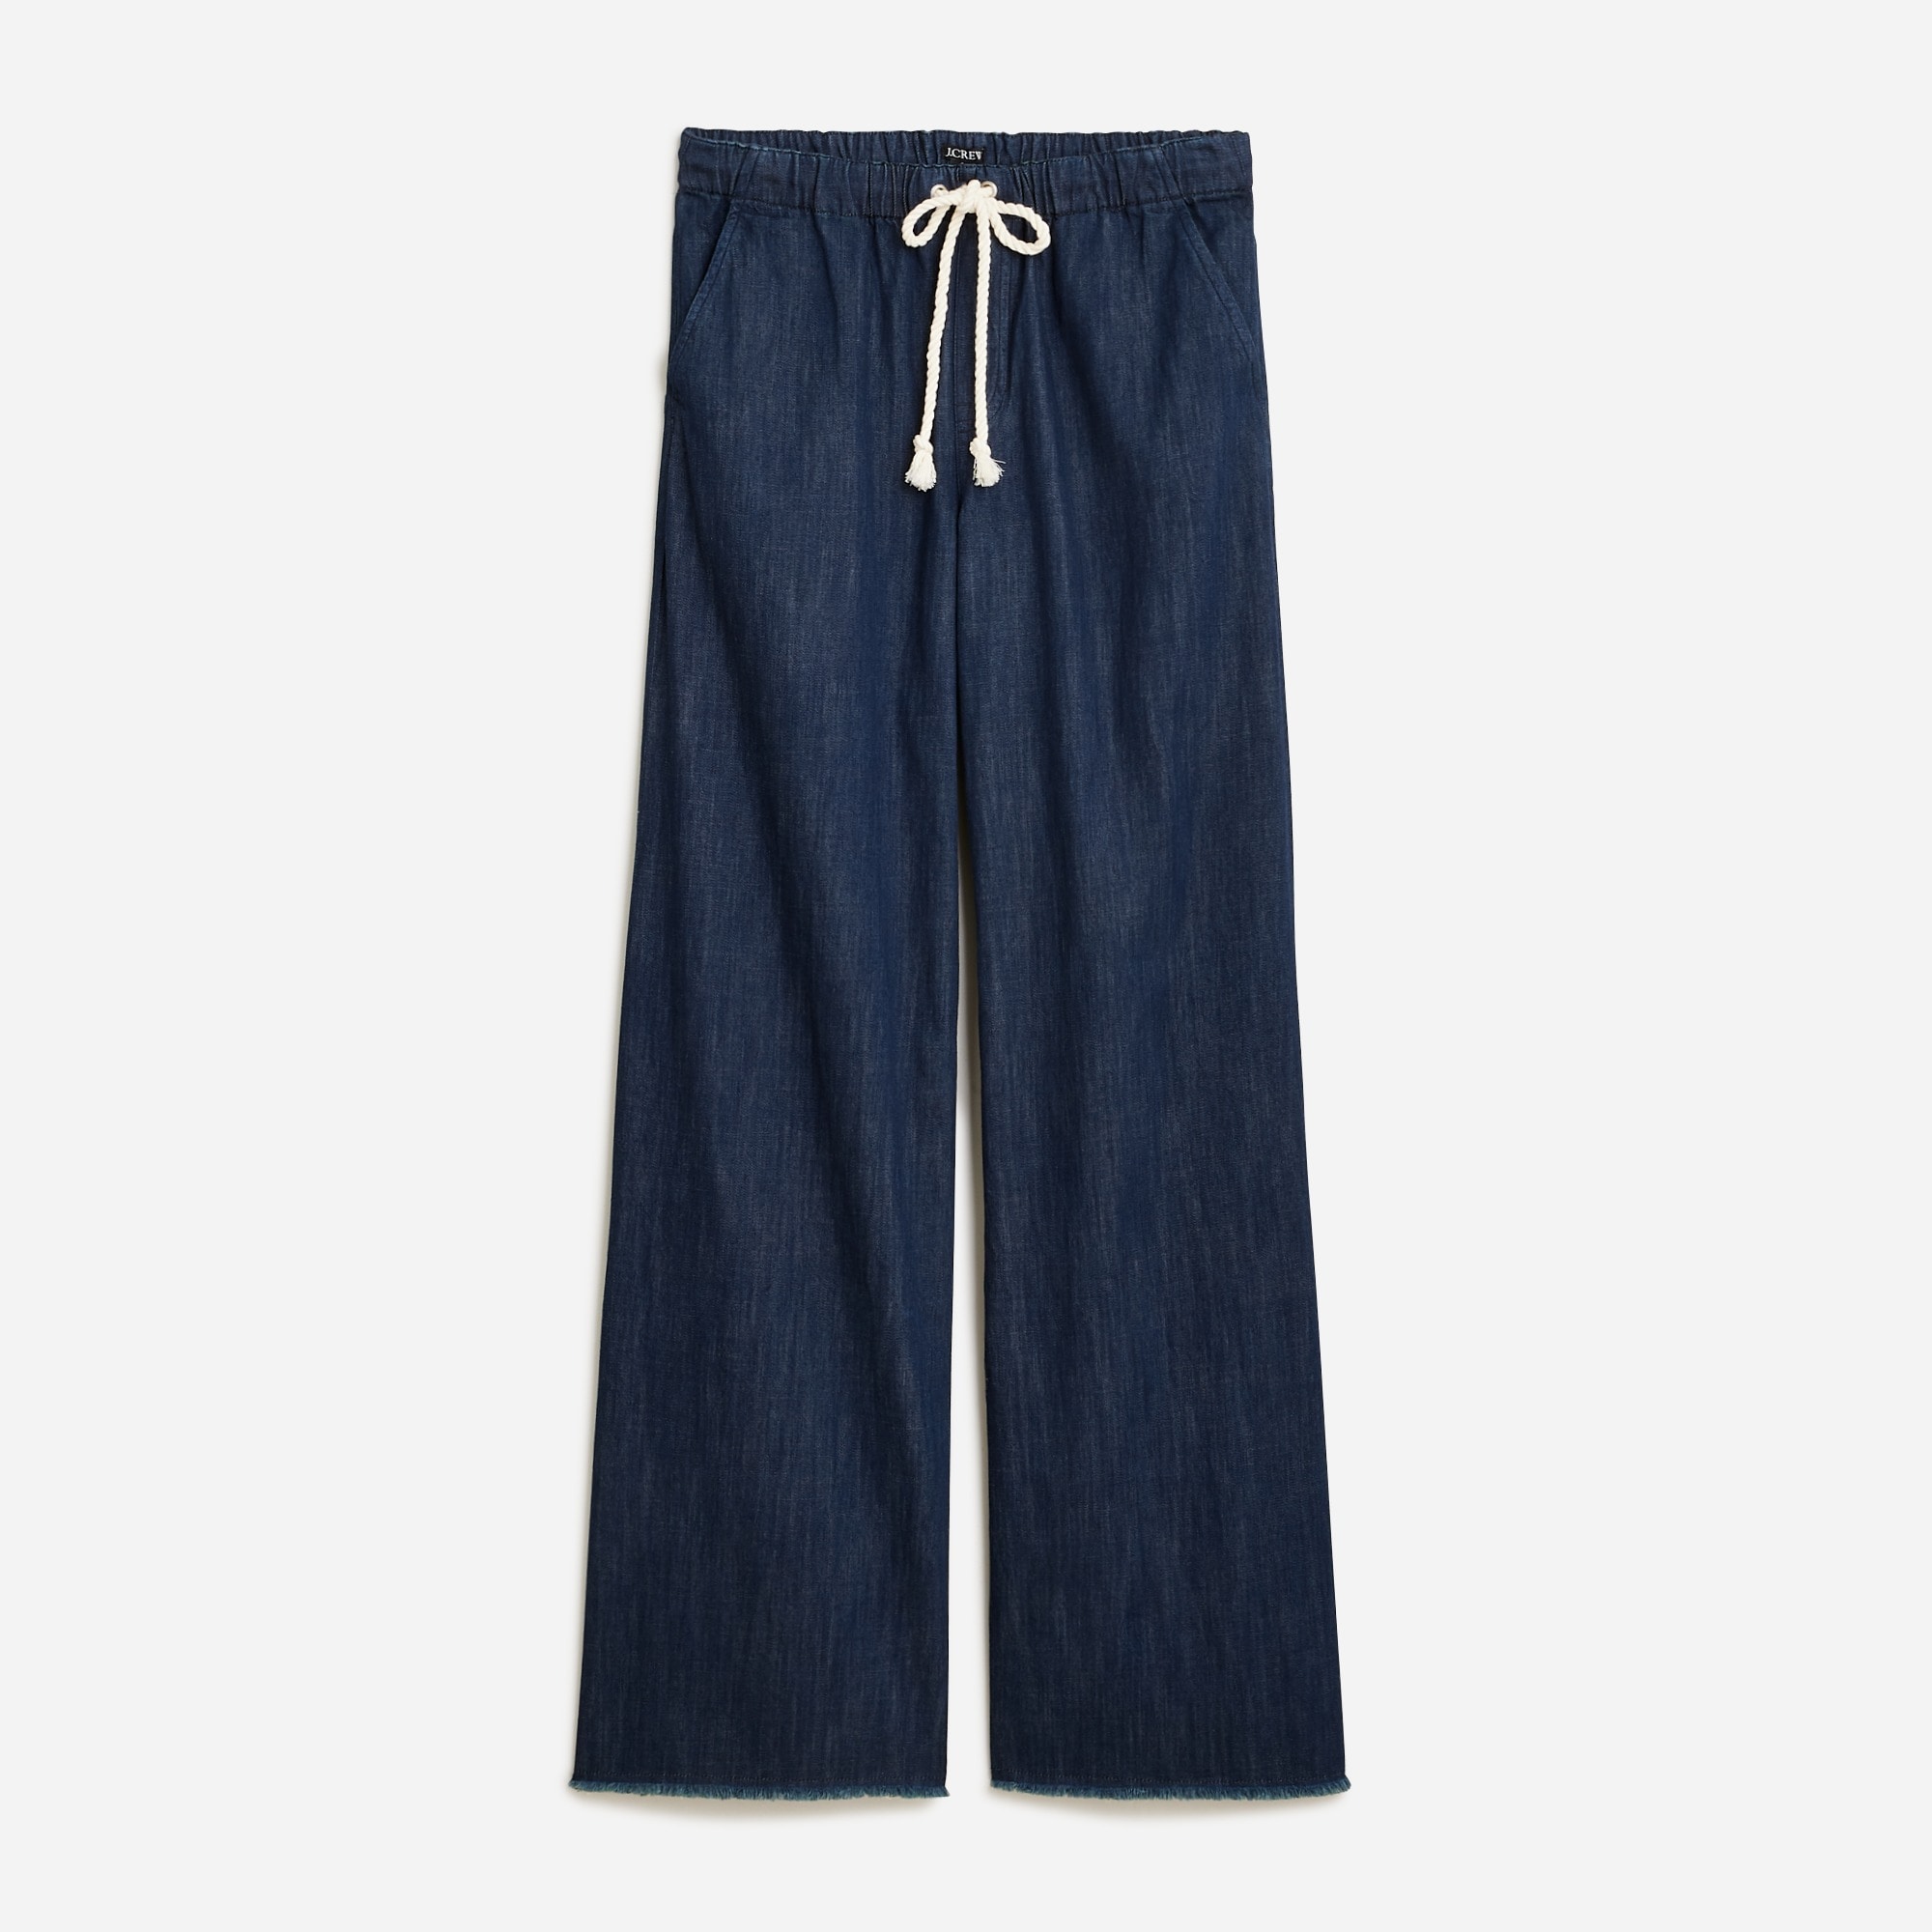  Pull-on drapey puddle jean